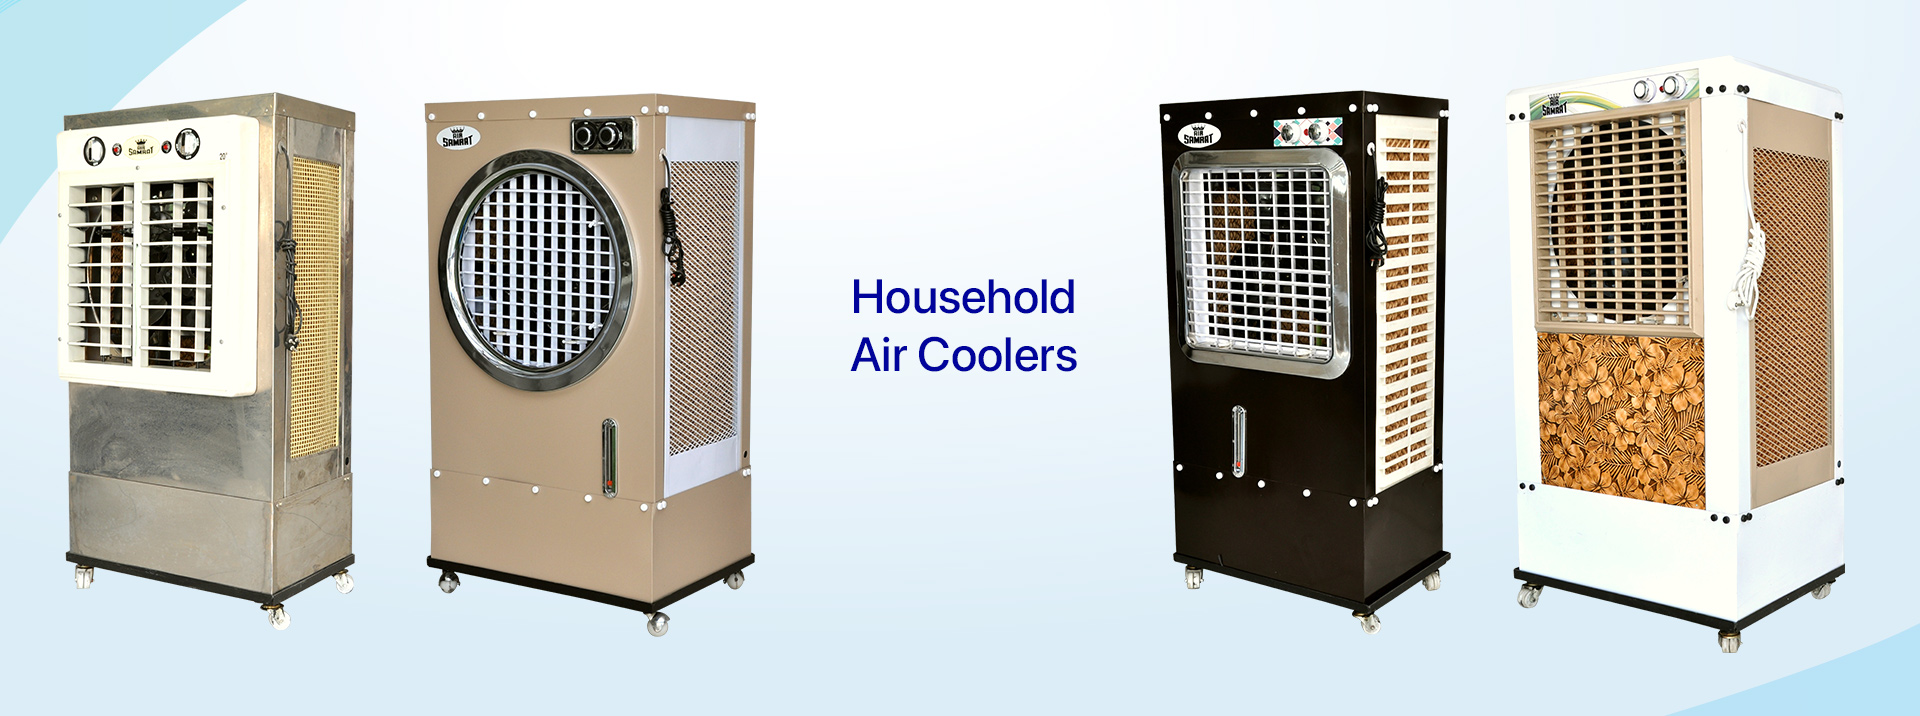 Household Coolers